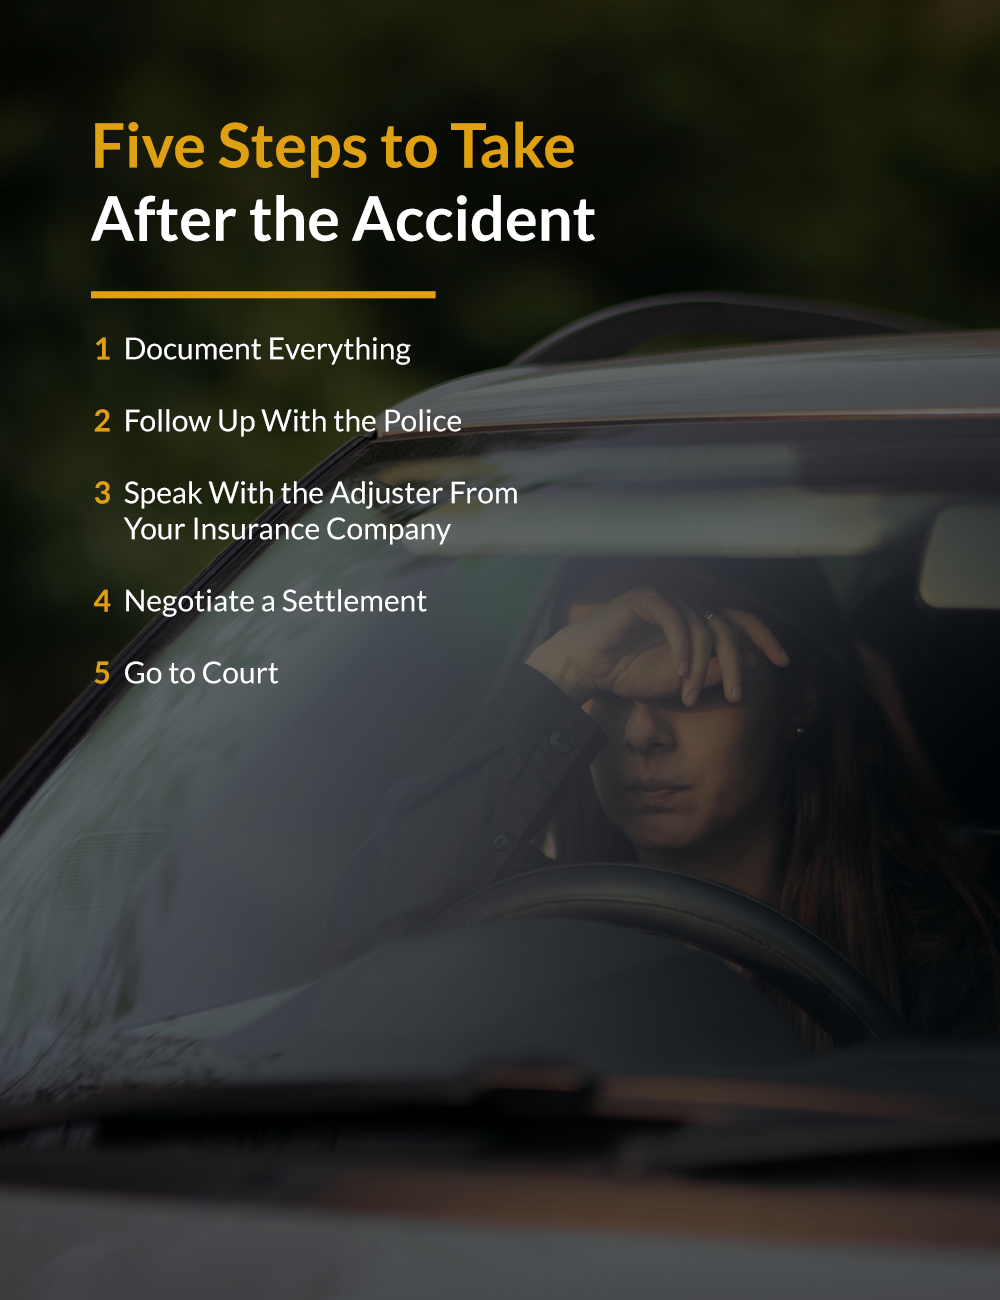 Steps to take after an accident